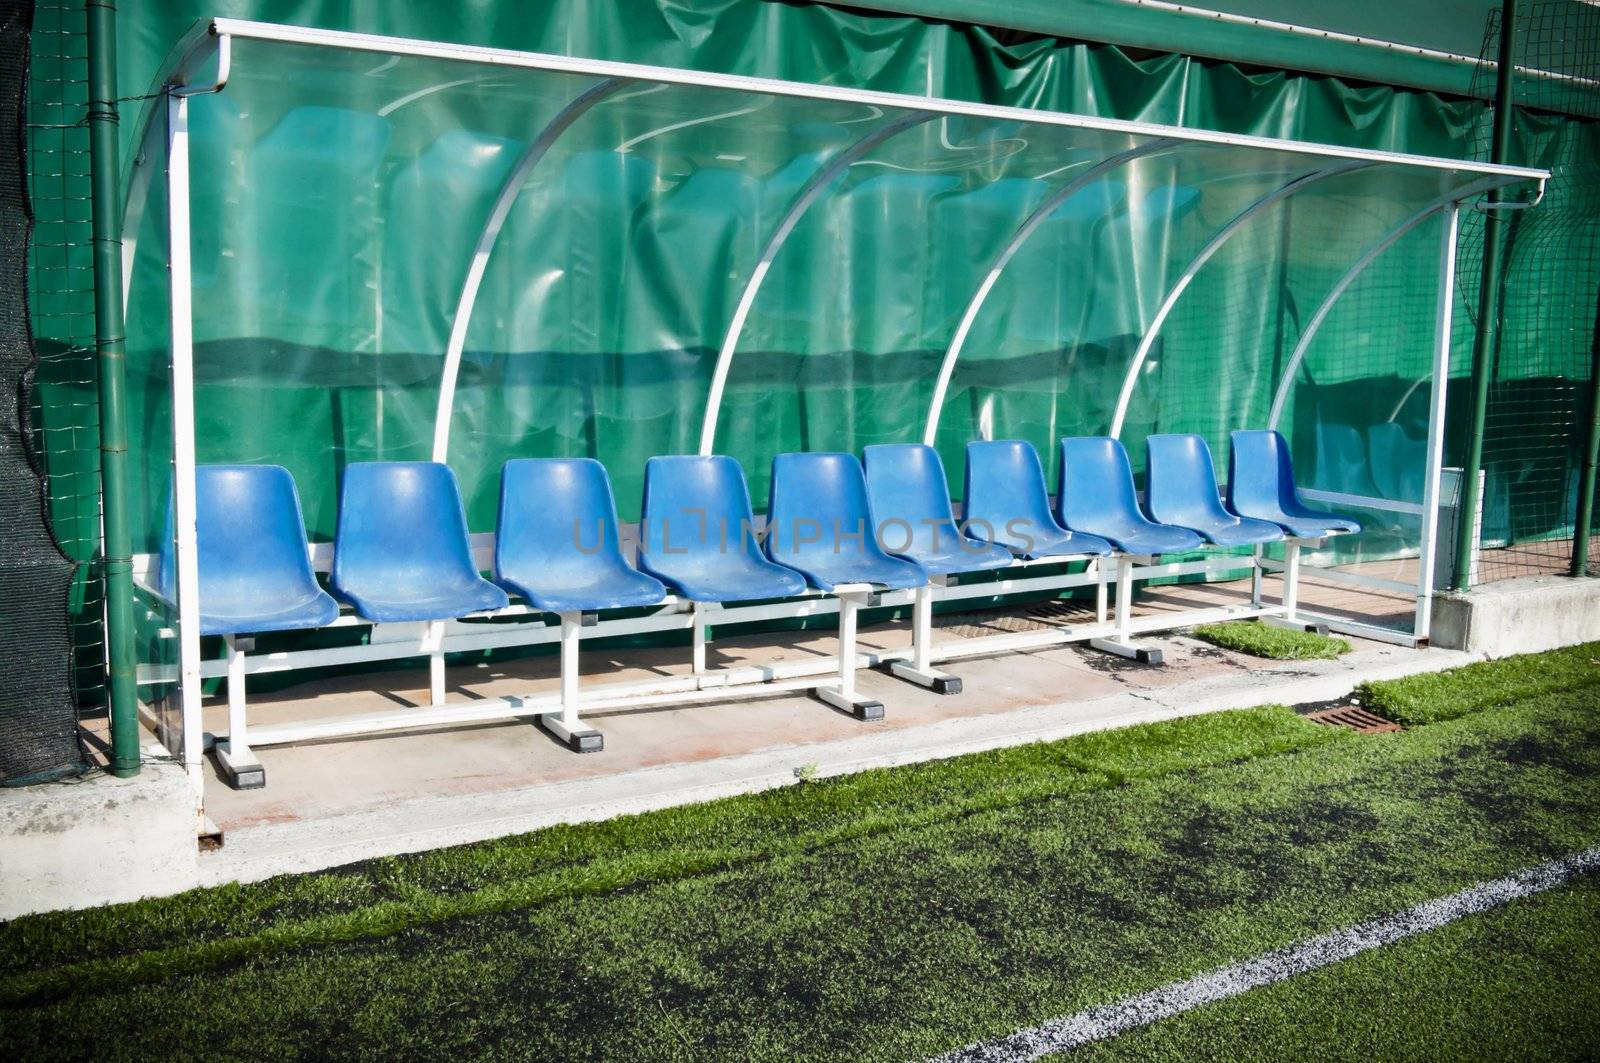  Coach benches by rigamondis